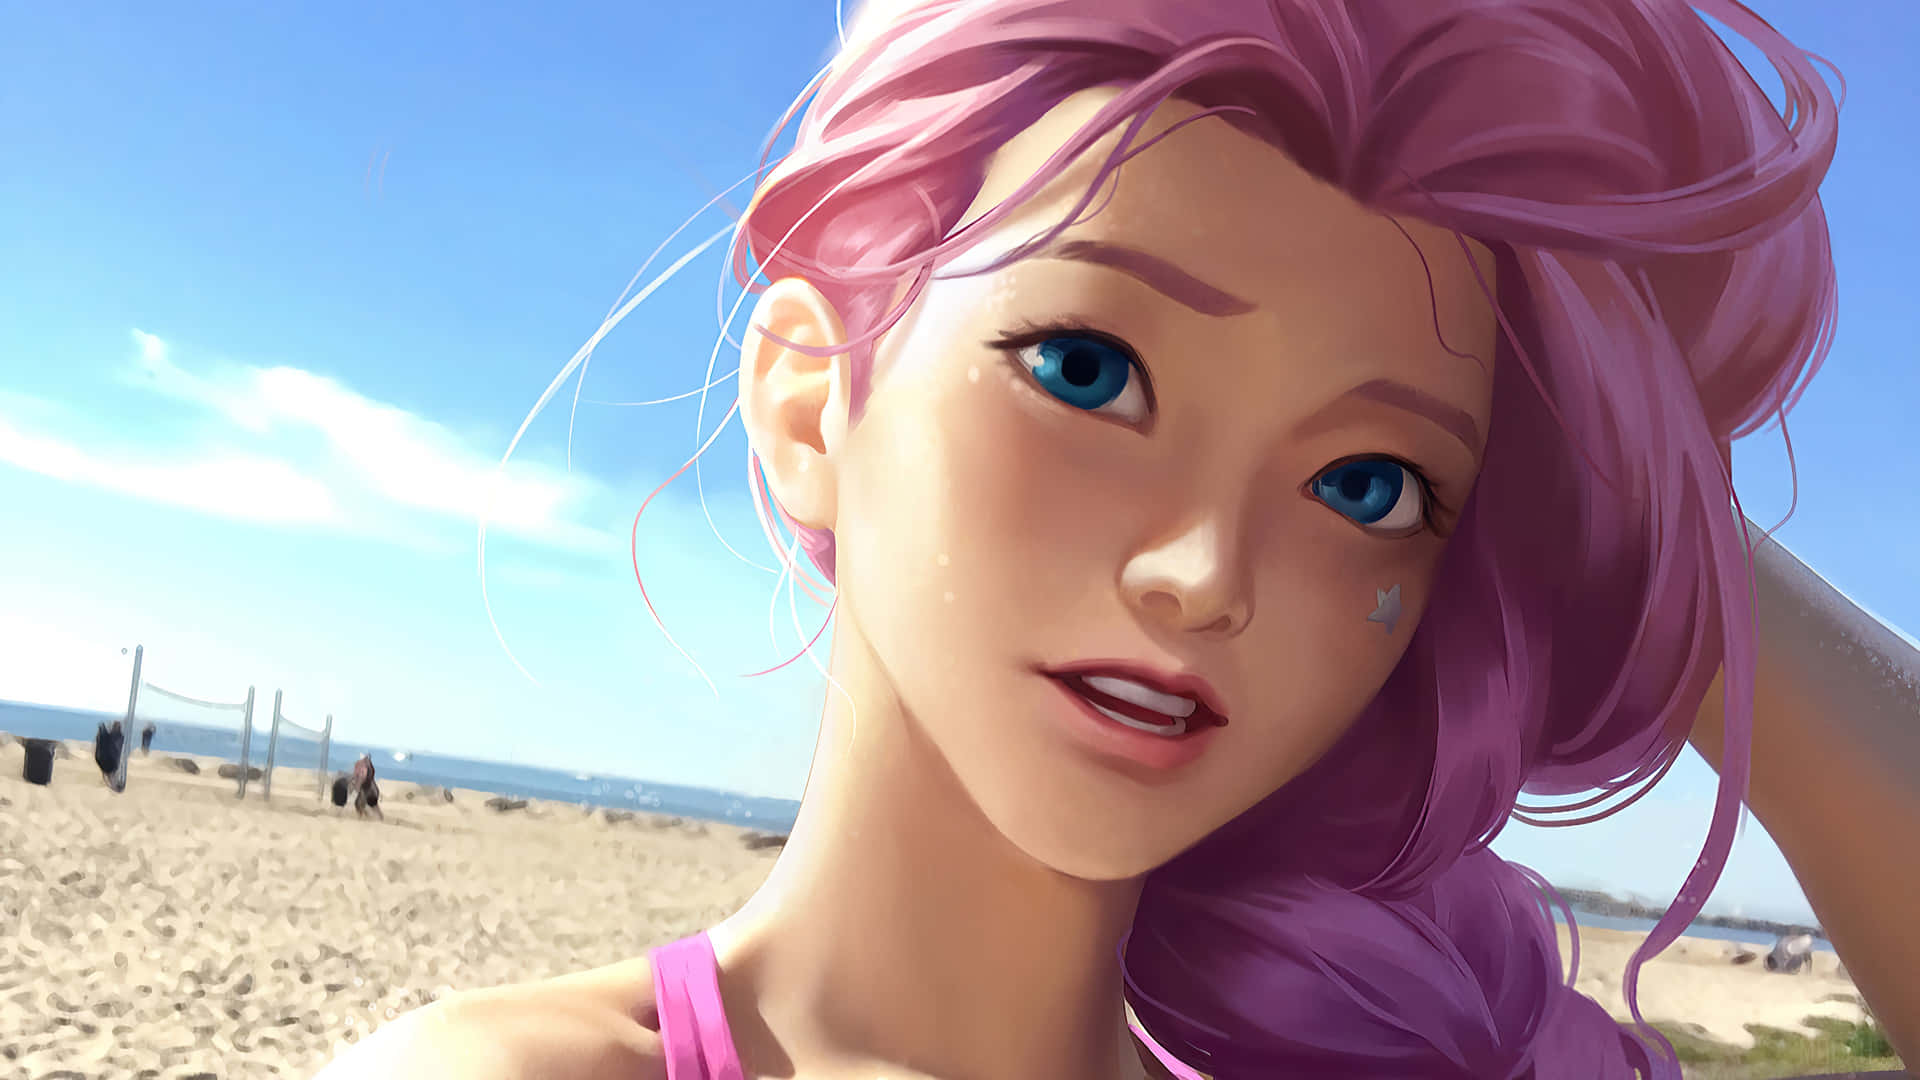 A Girl With Pink Hair Is Standing On The Beach